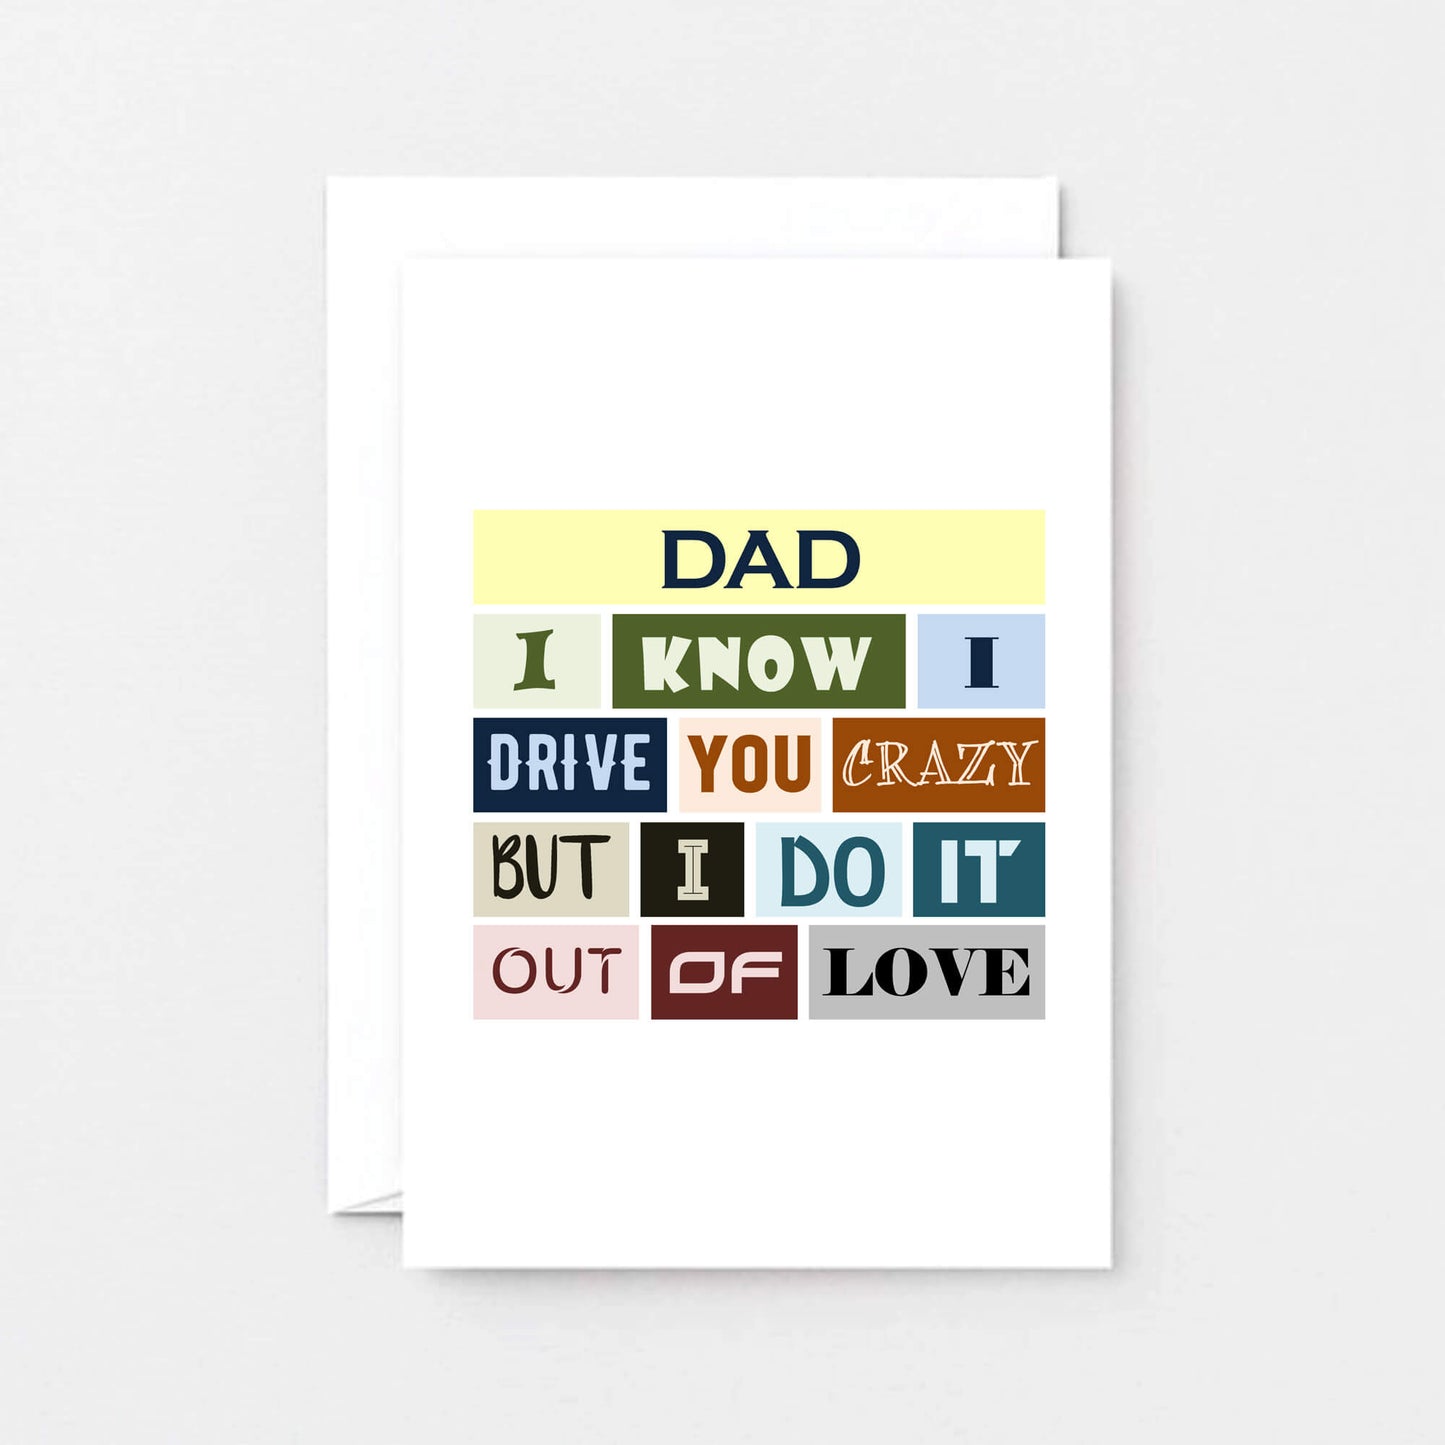 Funny Dad Card by SixElevenCreations. Reads Dad I know I drive you crazy but I do it out of love. Product Code SE0090A6